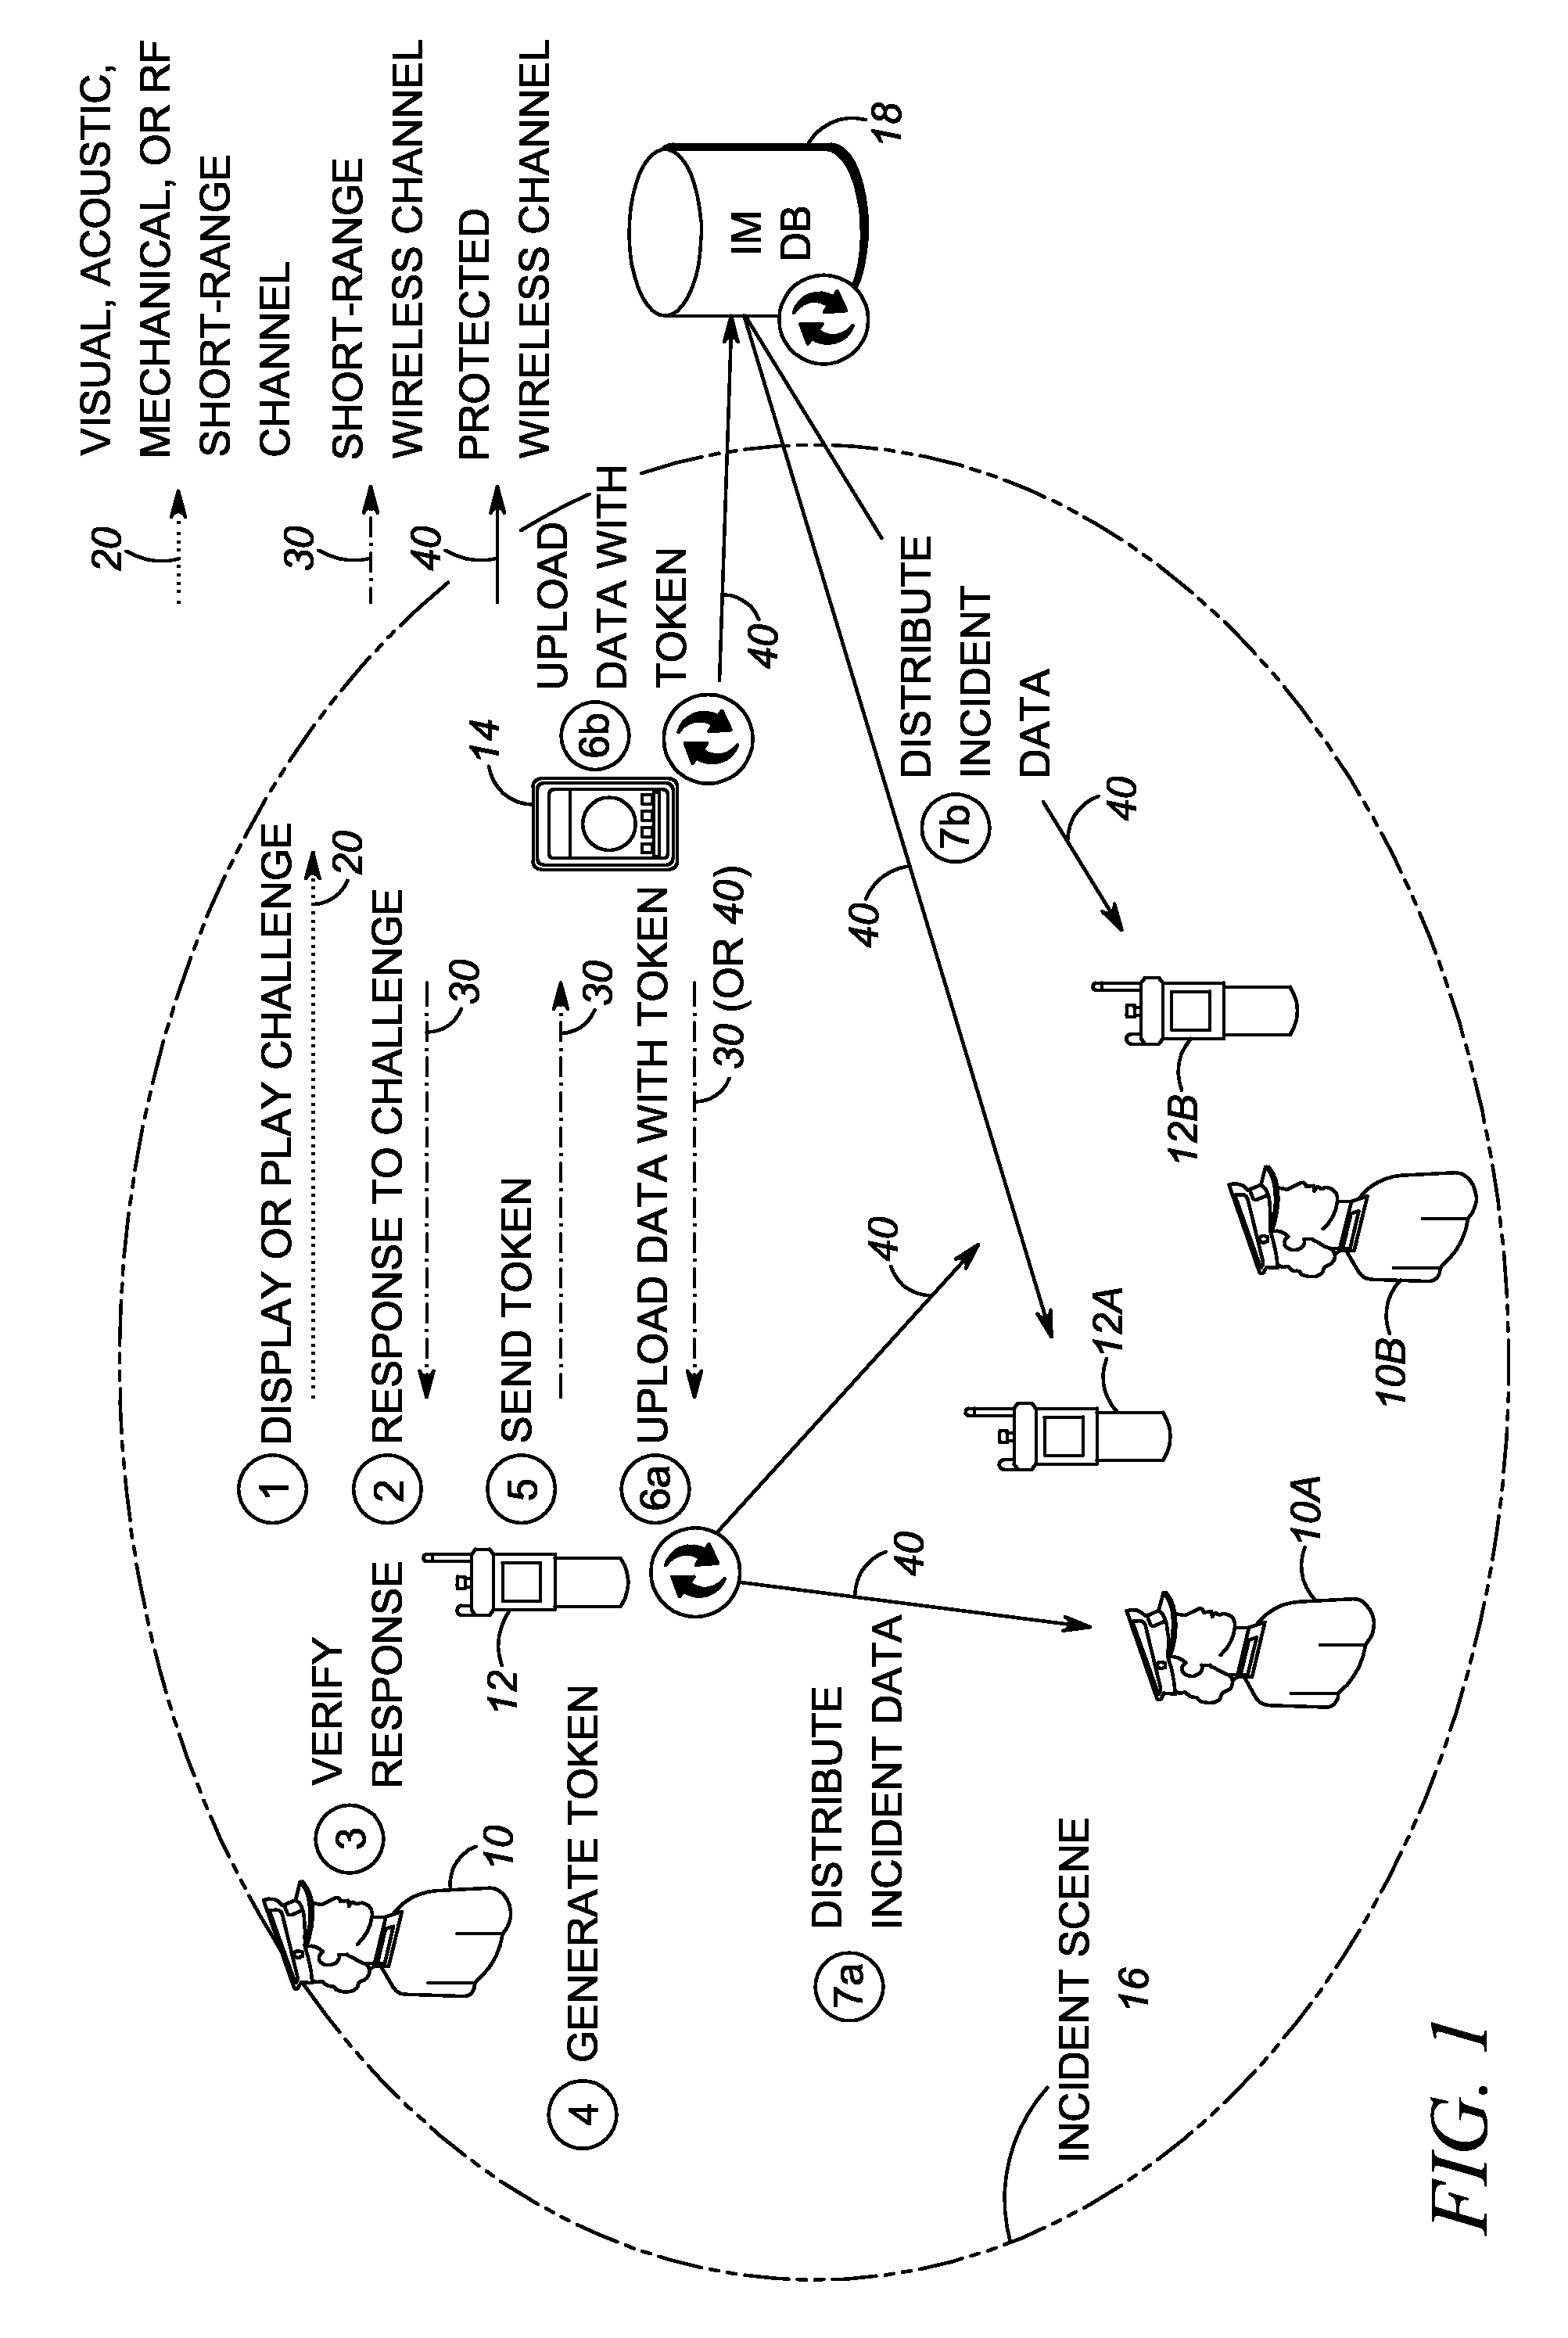 Method of and system for authenticating and operating personal communication devices over public safety networks